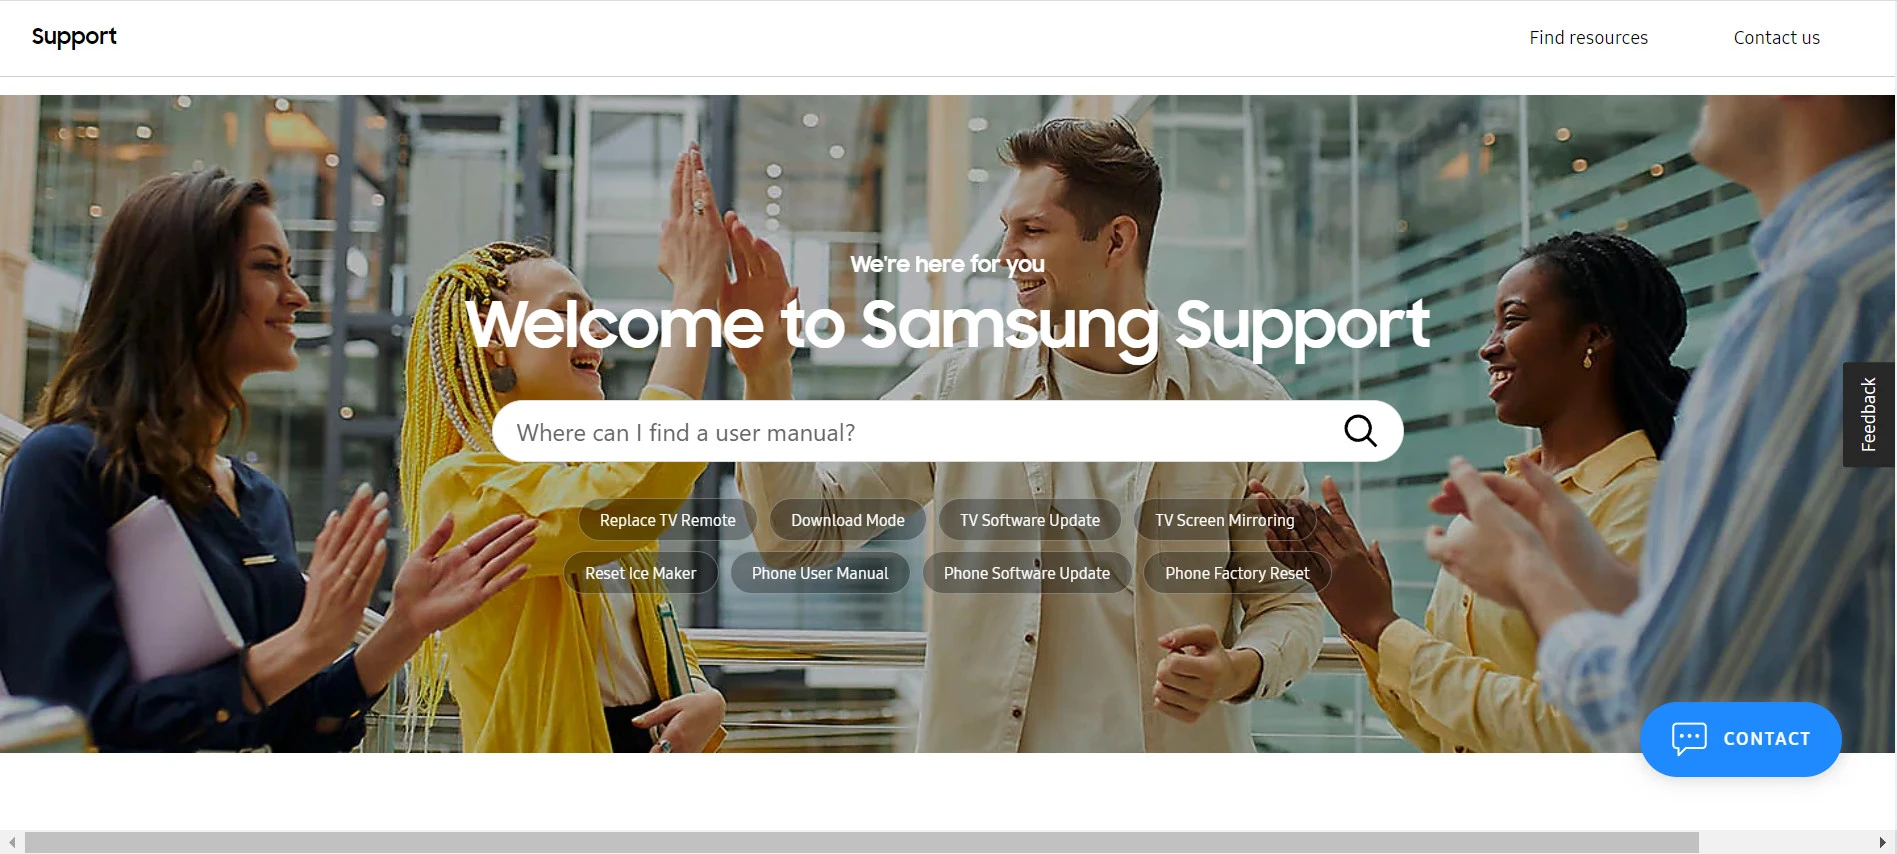 samsung knowledge base example